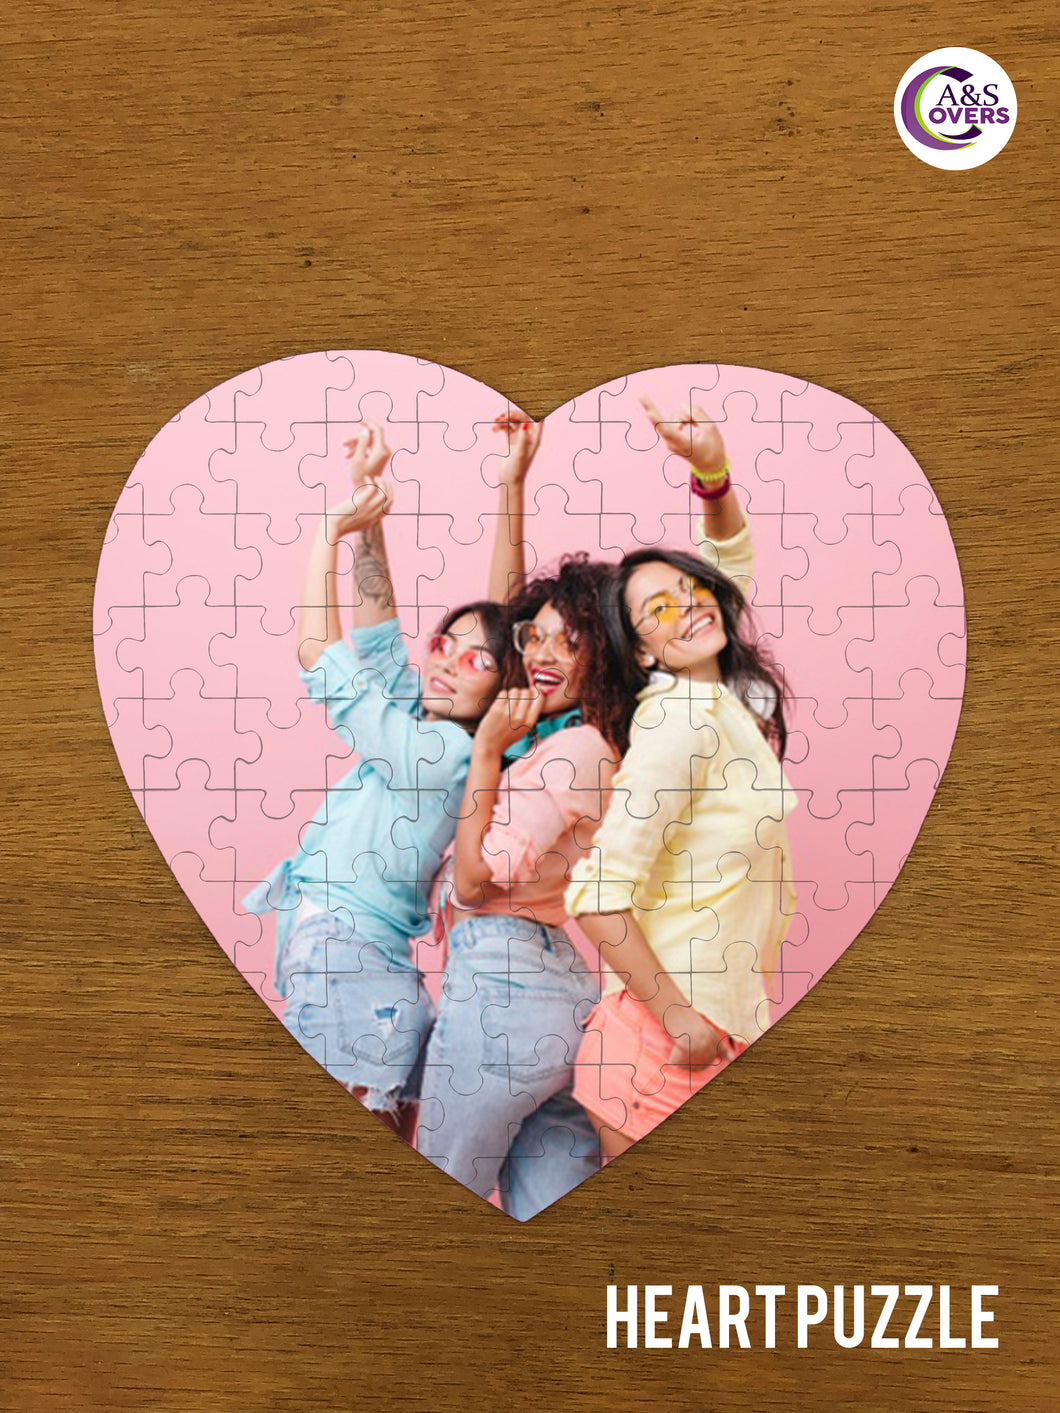 Heart Cardboard Puzzle - A&S Covers